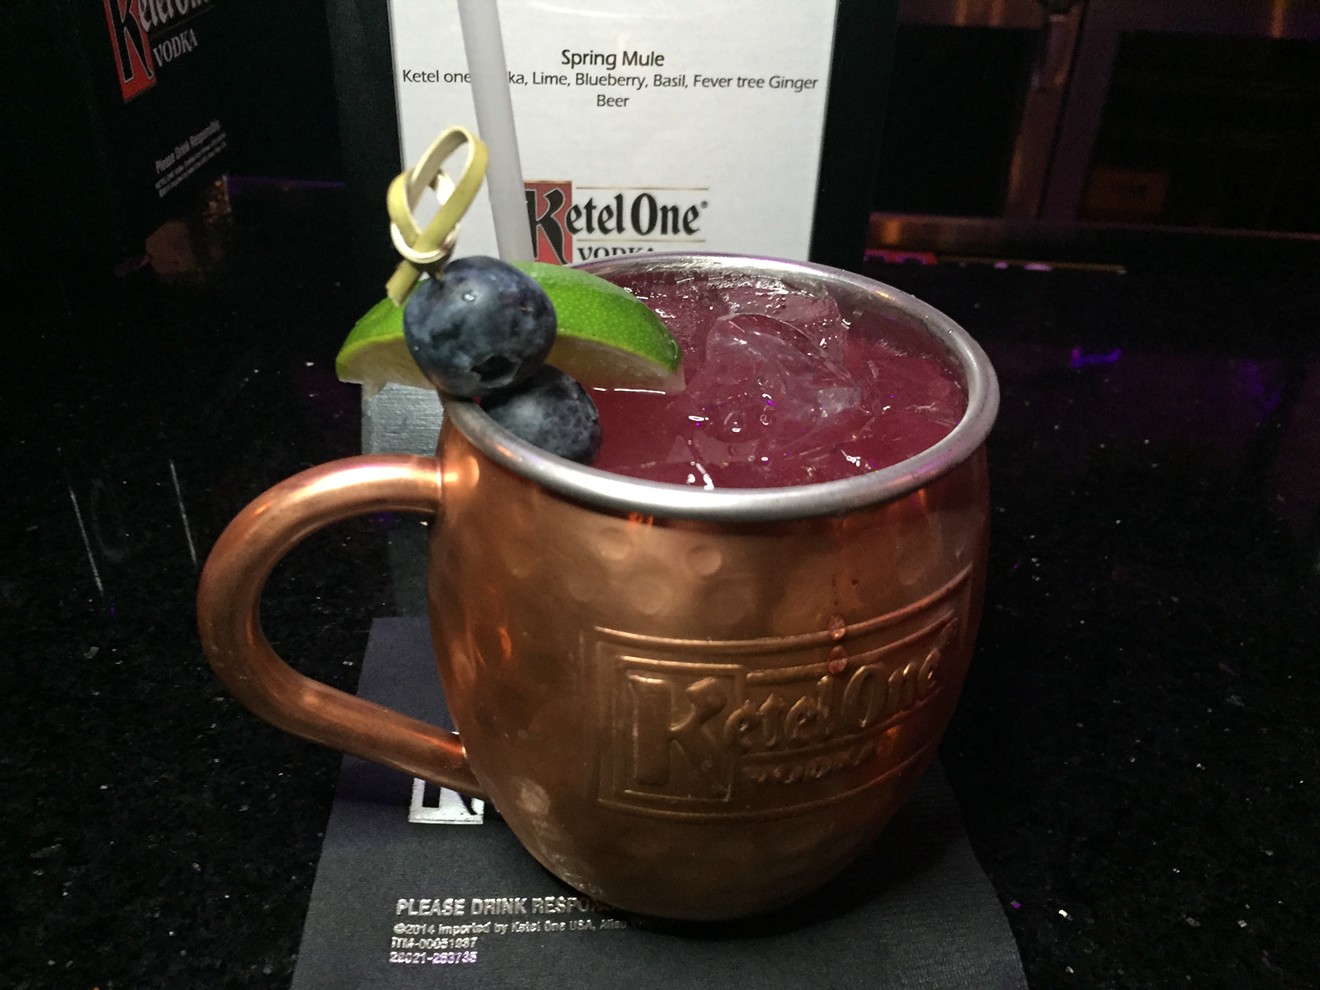 The Spring Mule by Rose Gold Cocktail Den consisted of muddled blueberries and a fresh blueberry garnish.